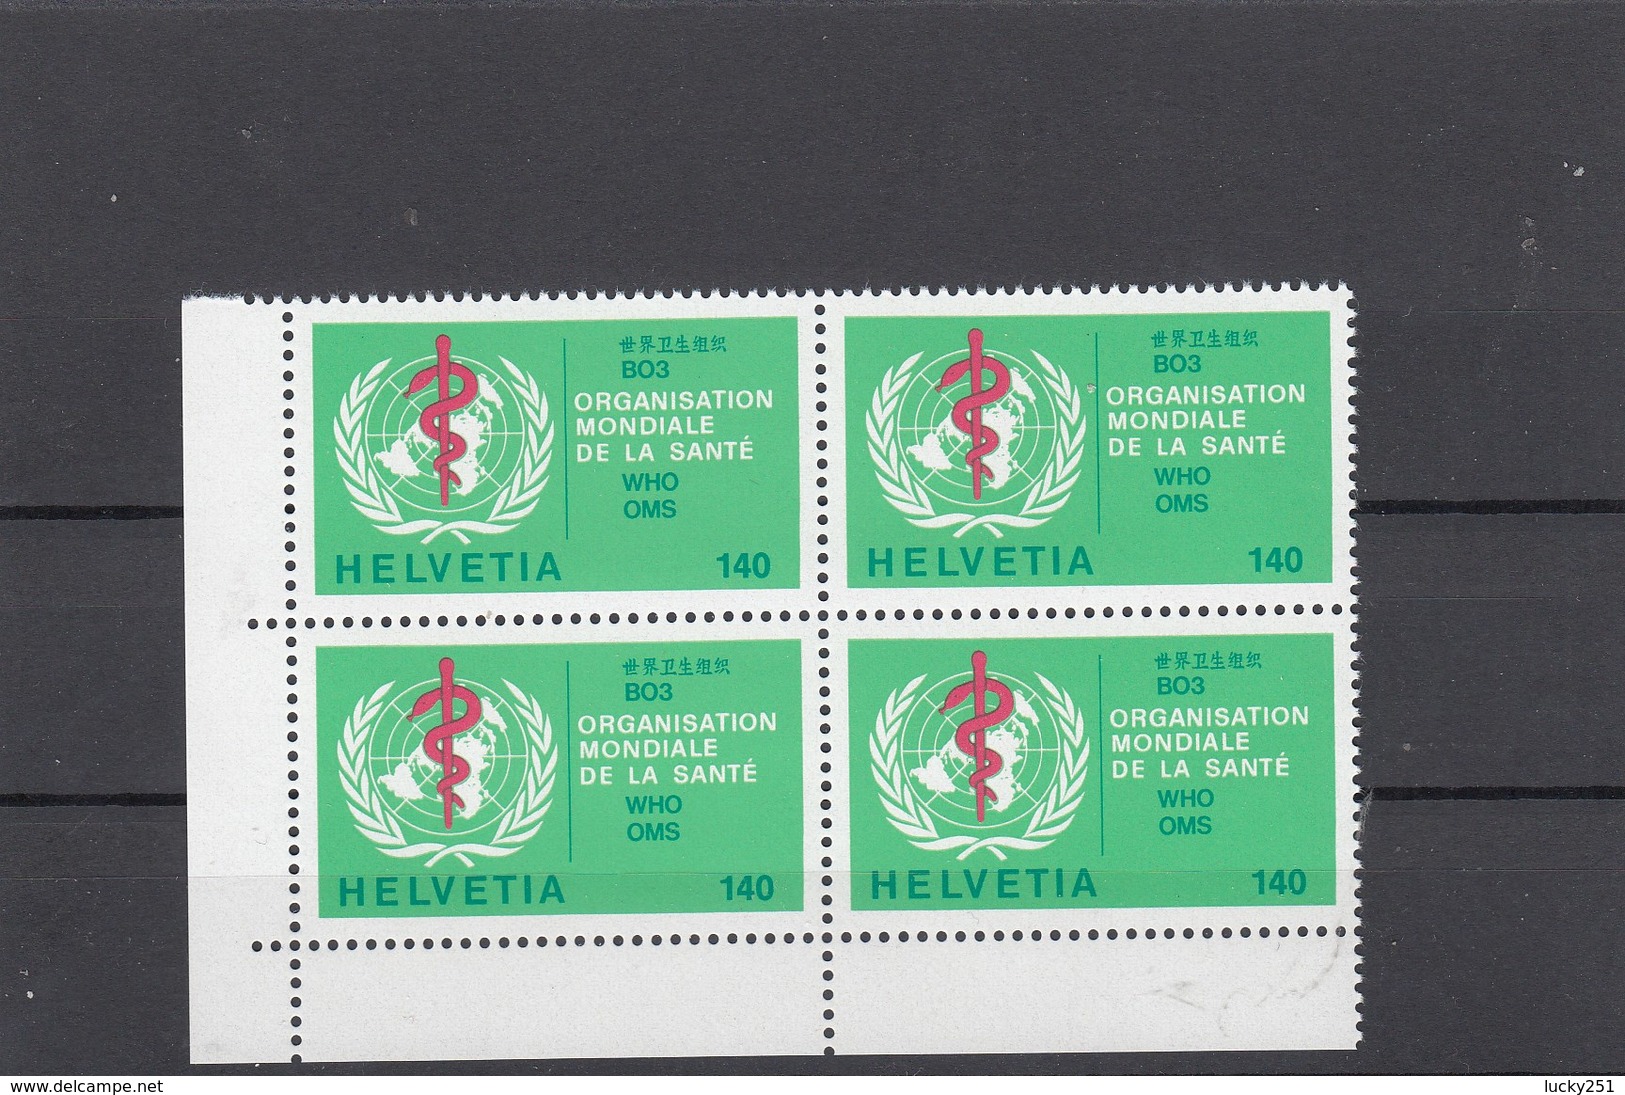 Suissi - 1986 - Neuf** - N° YT 464 - OMS - Officials